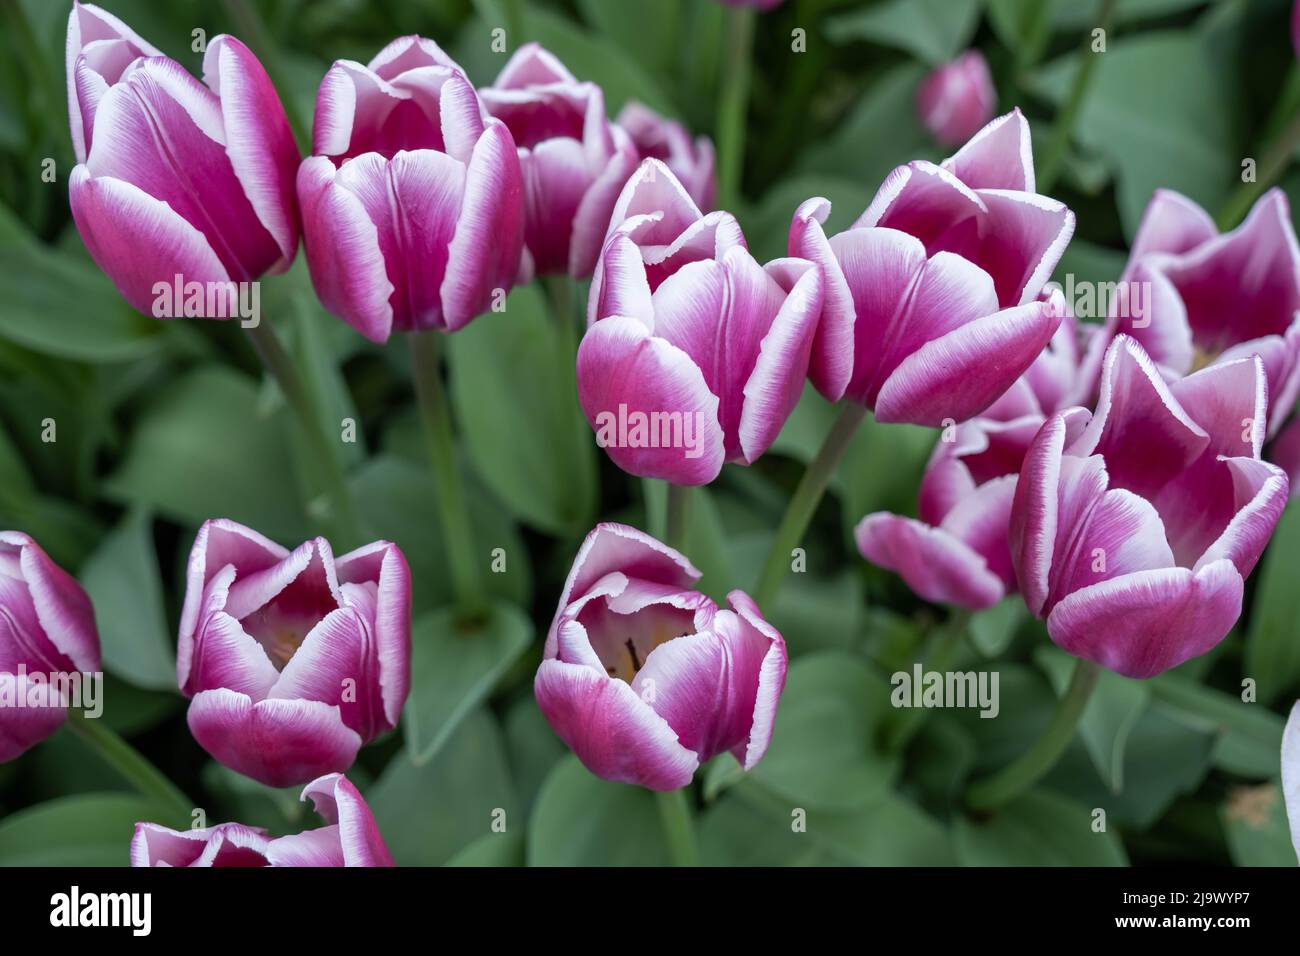 A field of beautiful pink tulips with white edging. Blooming tulip fields in Lithuania. Bright pink with white edges tulip flowers in spring garden. Stock Photo